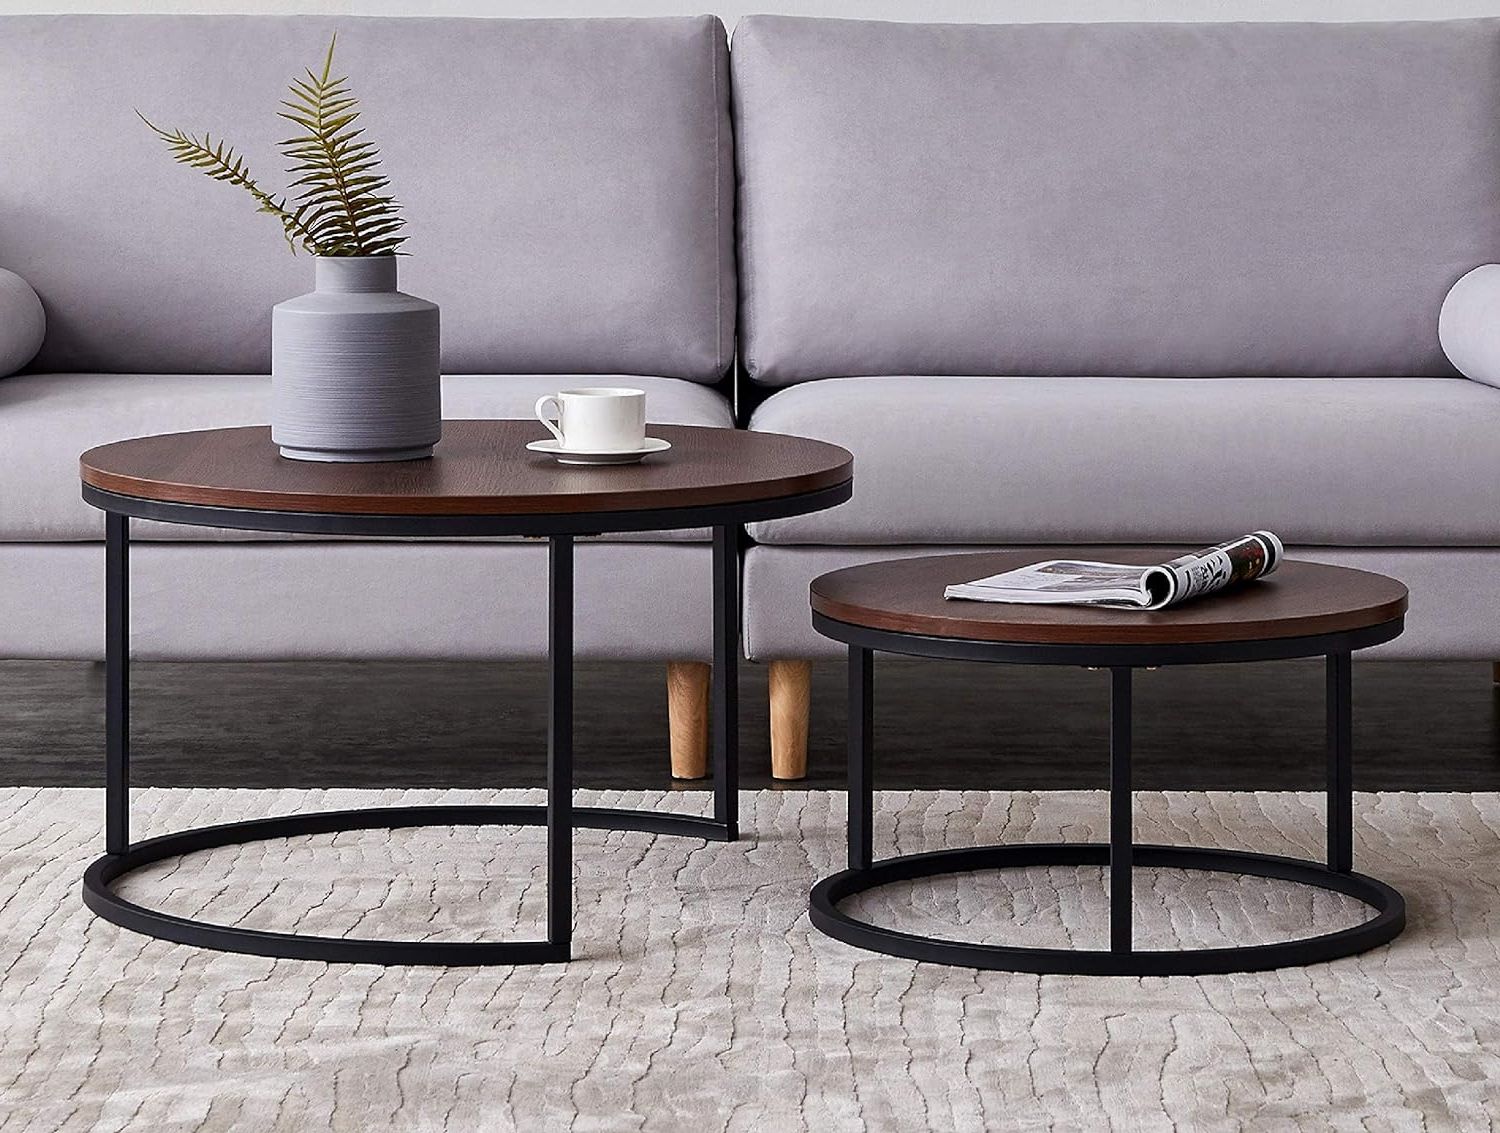 Fashionable Buy Knowlife Coffee Table Set Of 2 Nesting Tables Modern Round Walnut With Modern Nesting Coffee Tables (View 8 of 15)